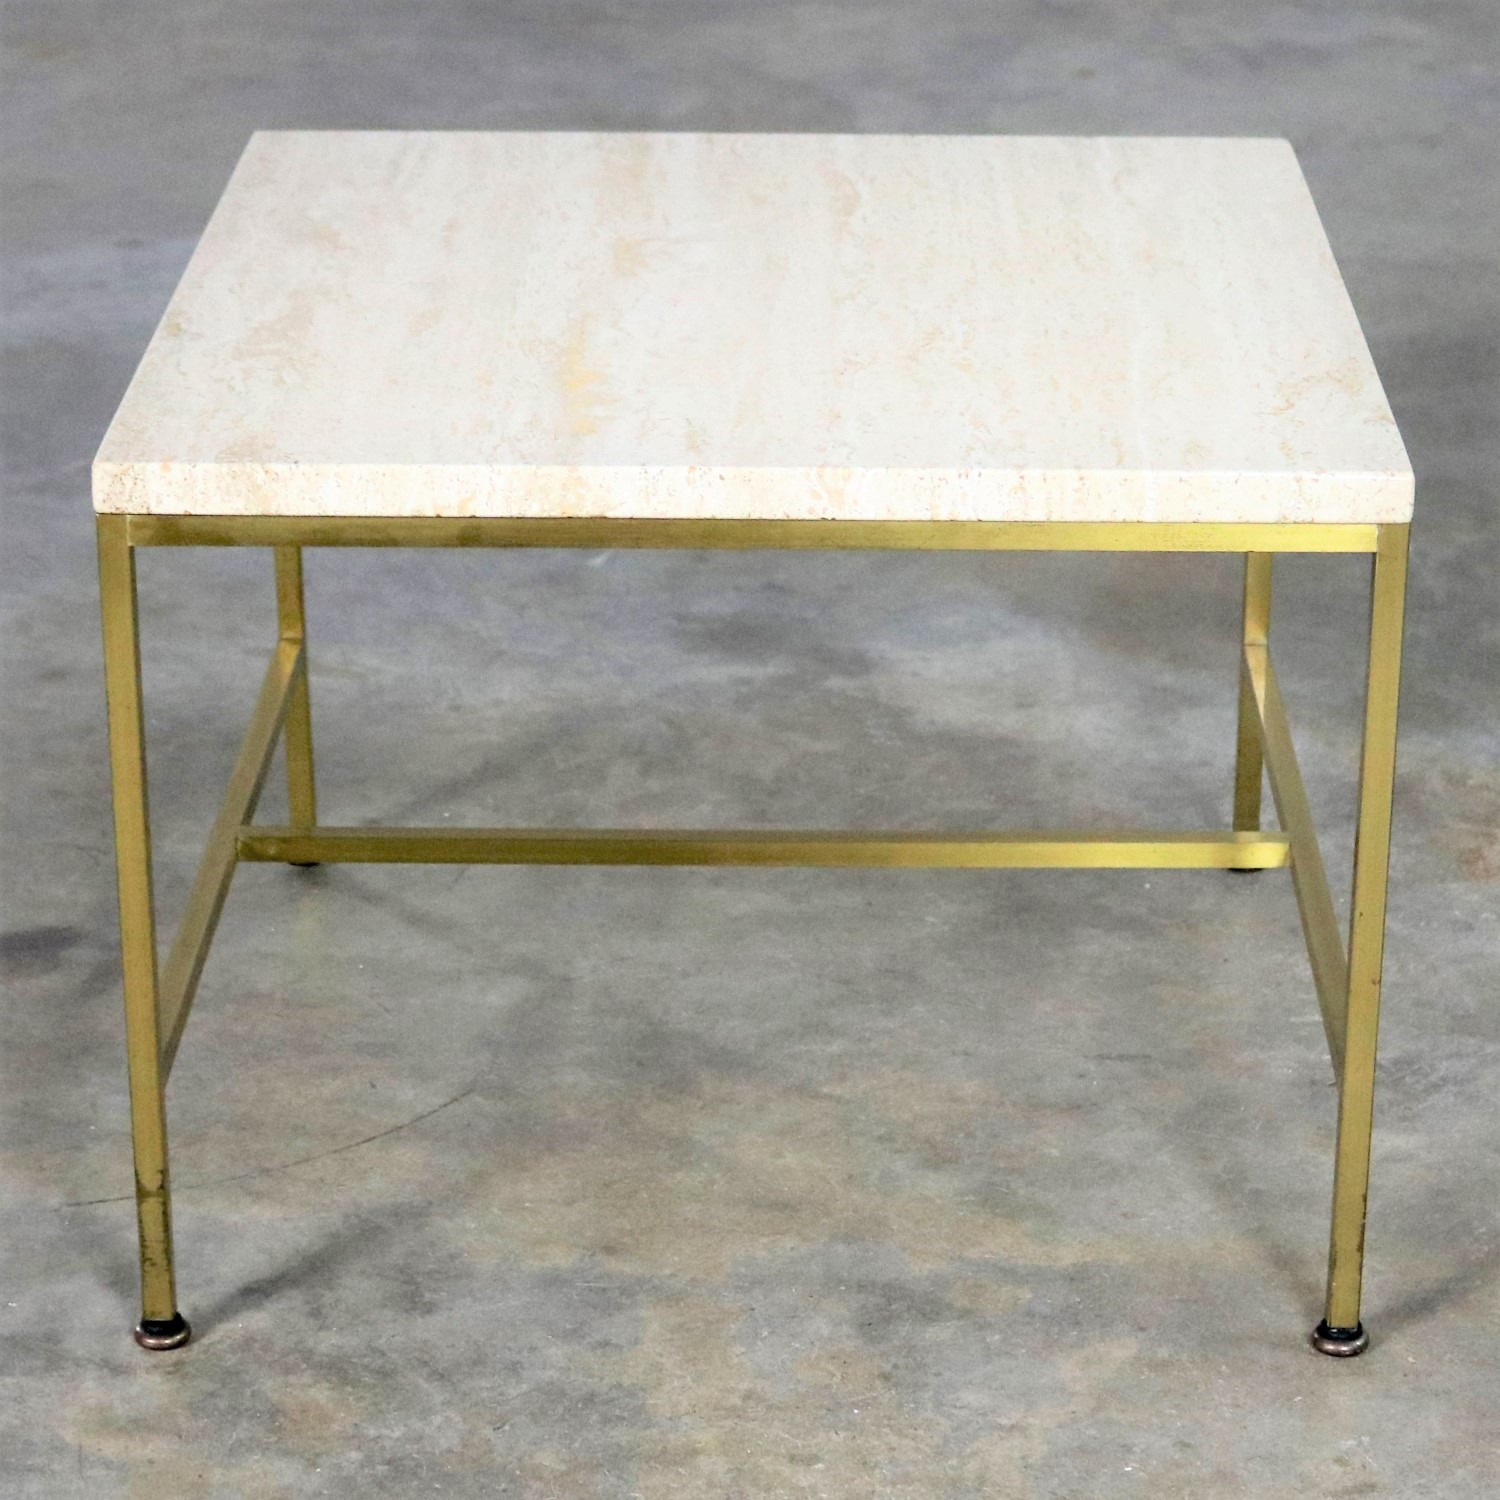 Paul McCobb for Directional Brass Frame and Travertine Top Side Table